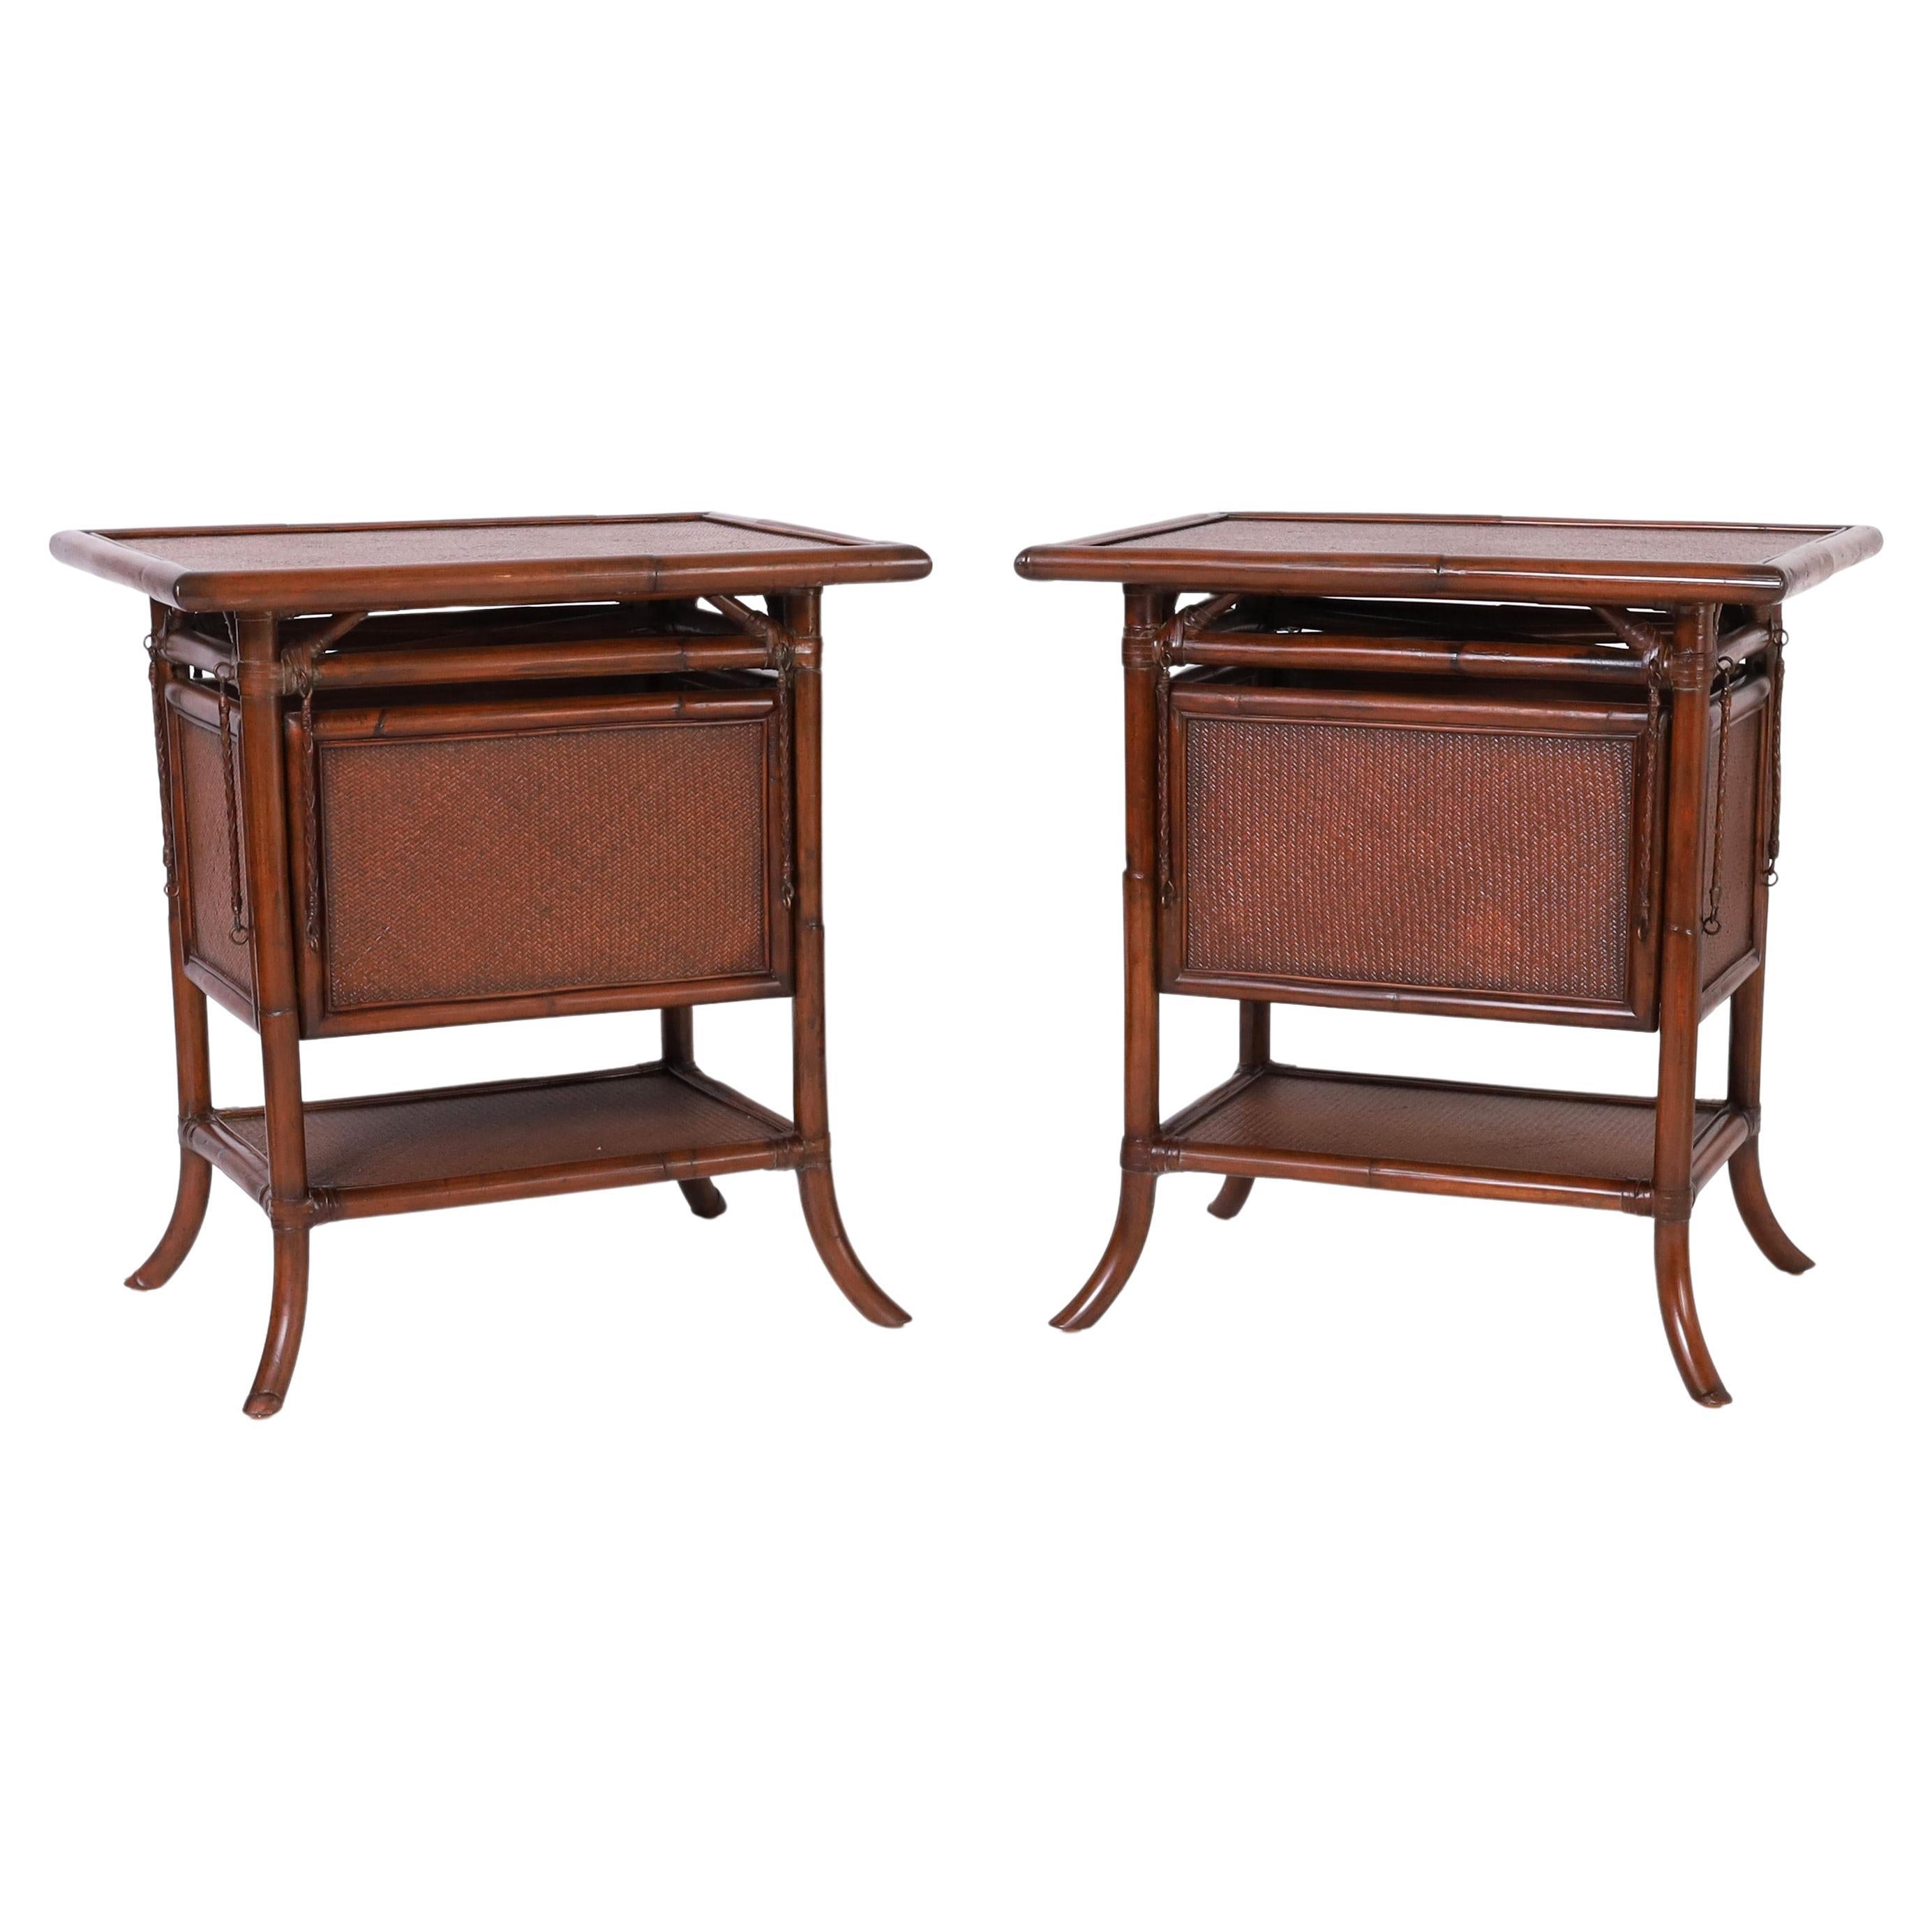 British Colonial Style Pair of Bamboo and Grasscloth Stands or Tables